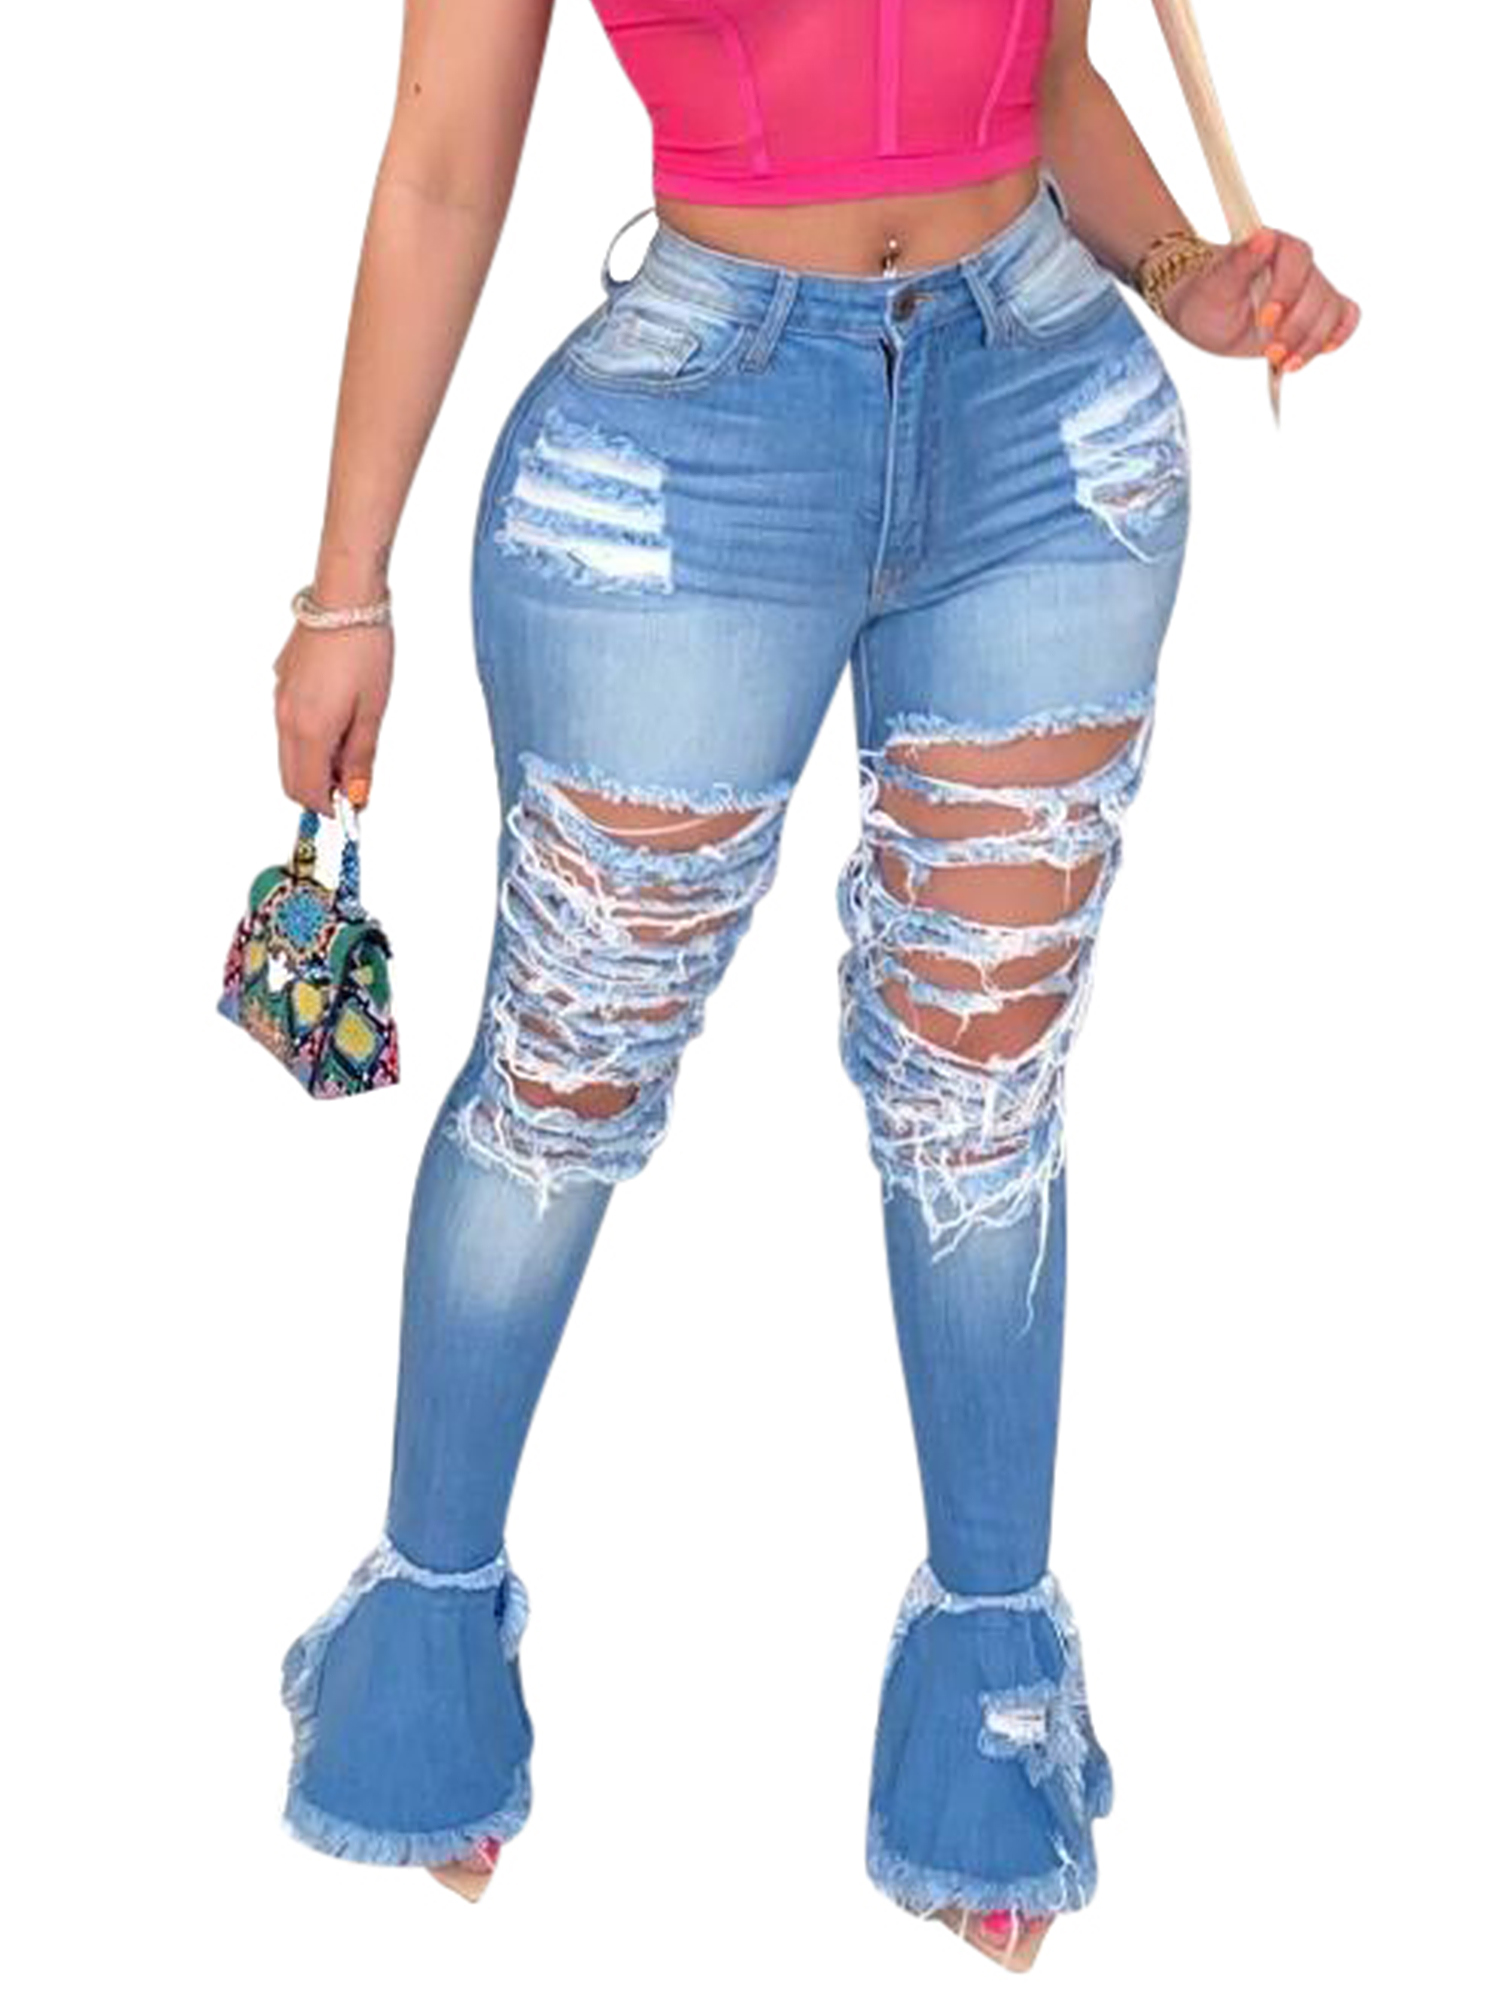 Women Casual Denim Jeans Pants Ladies Mid Waist Ripped Bell Bottom Jegging Trouser Pants Jeans with Hole - image 1 of 3